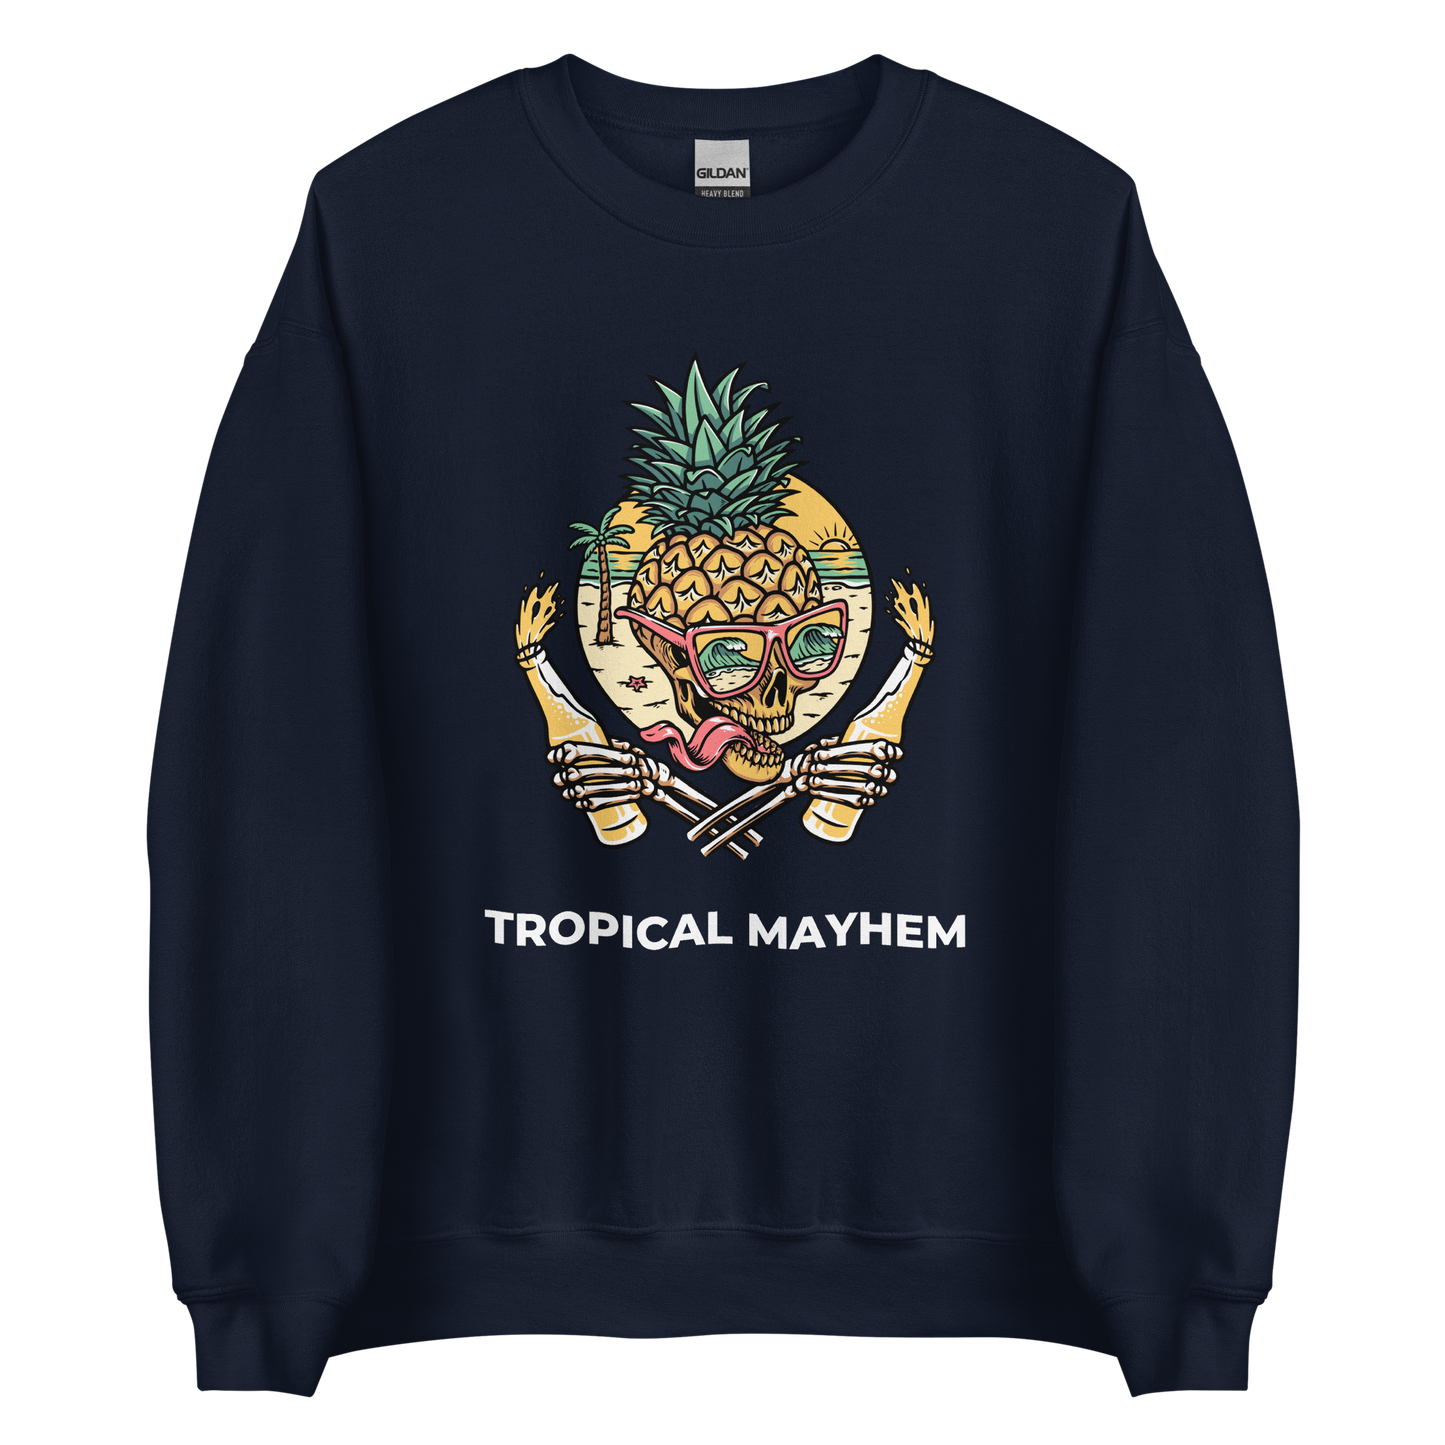 Navy Tropical Mayhem Sweatshirt featuring a Crazy Pineapple Skull graphic on the chest - Funny Graphic Pineapple Sweatshirts - Boozy Fox